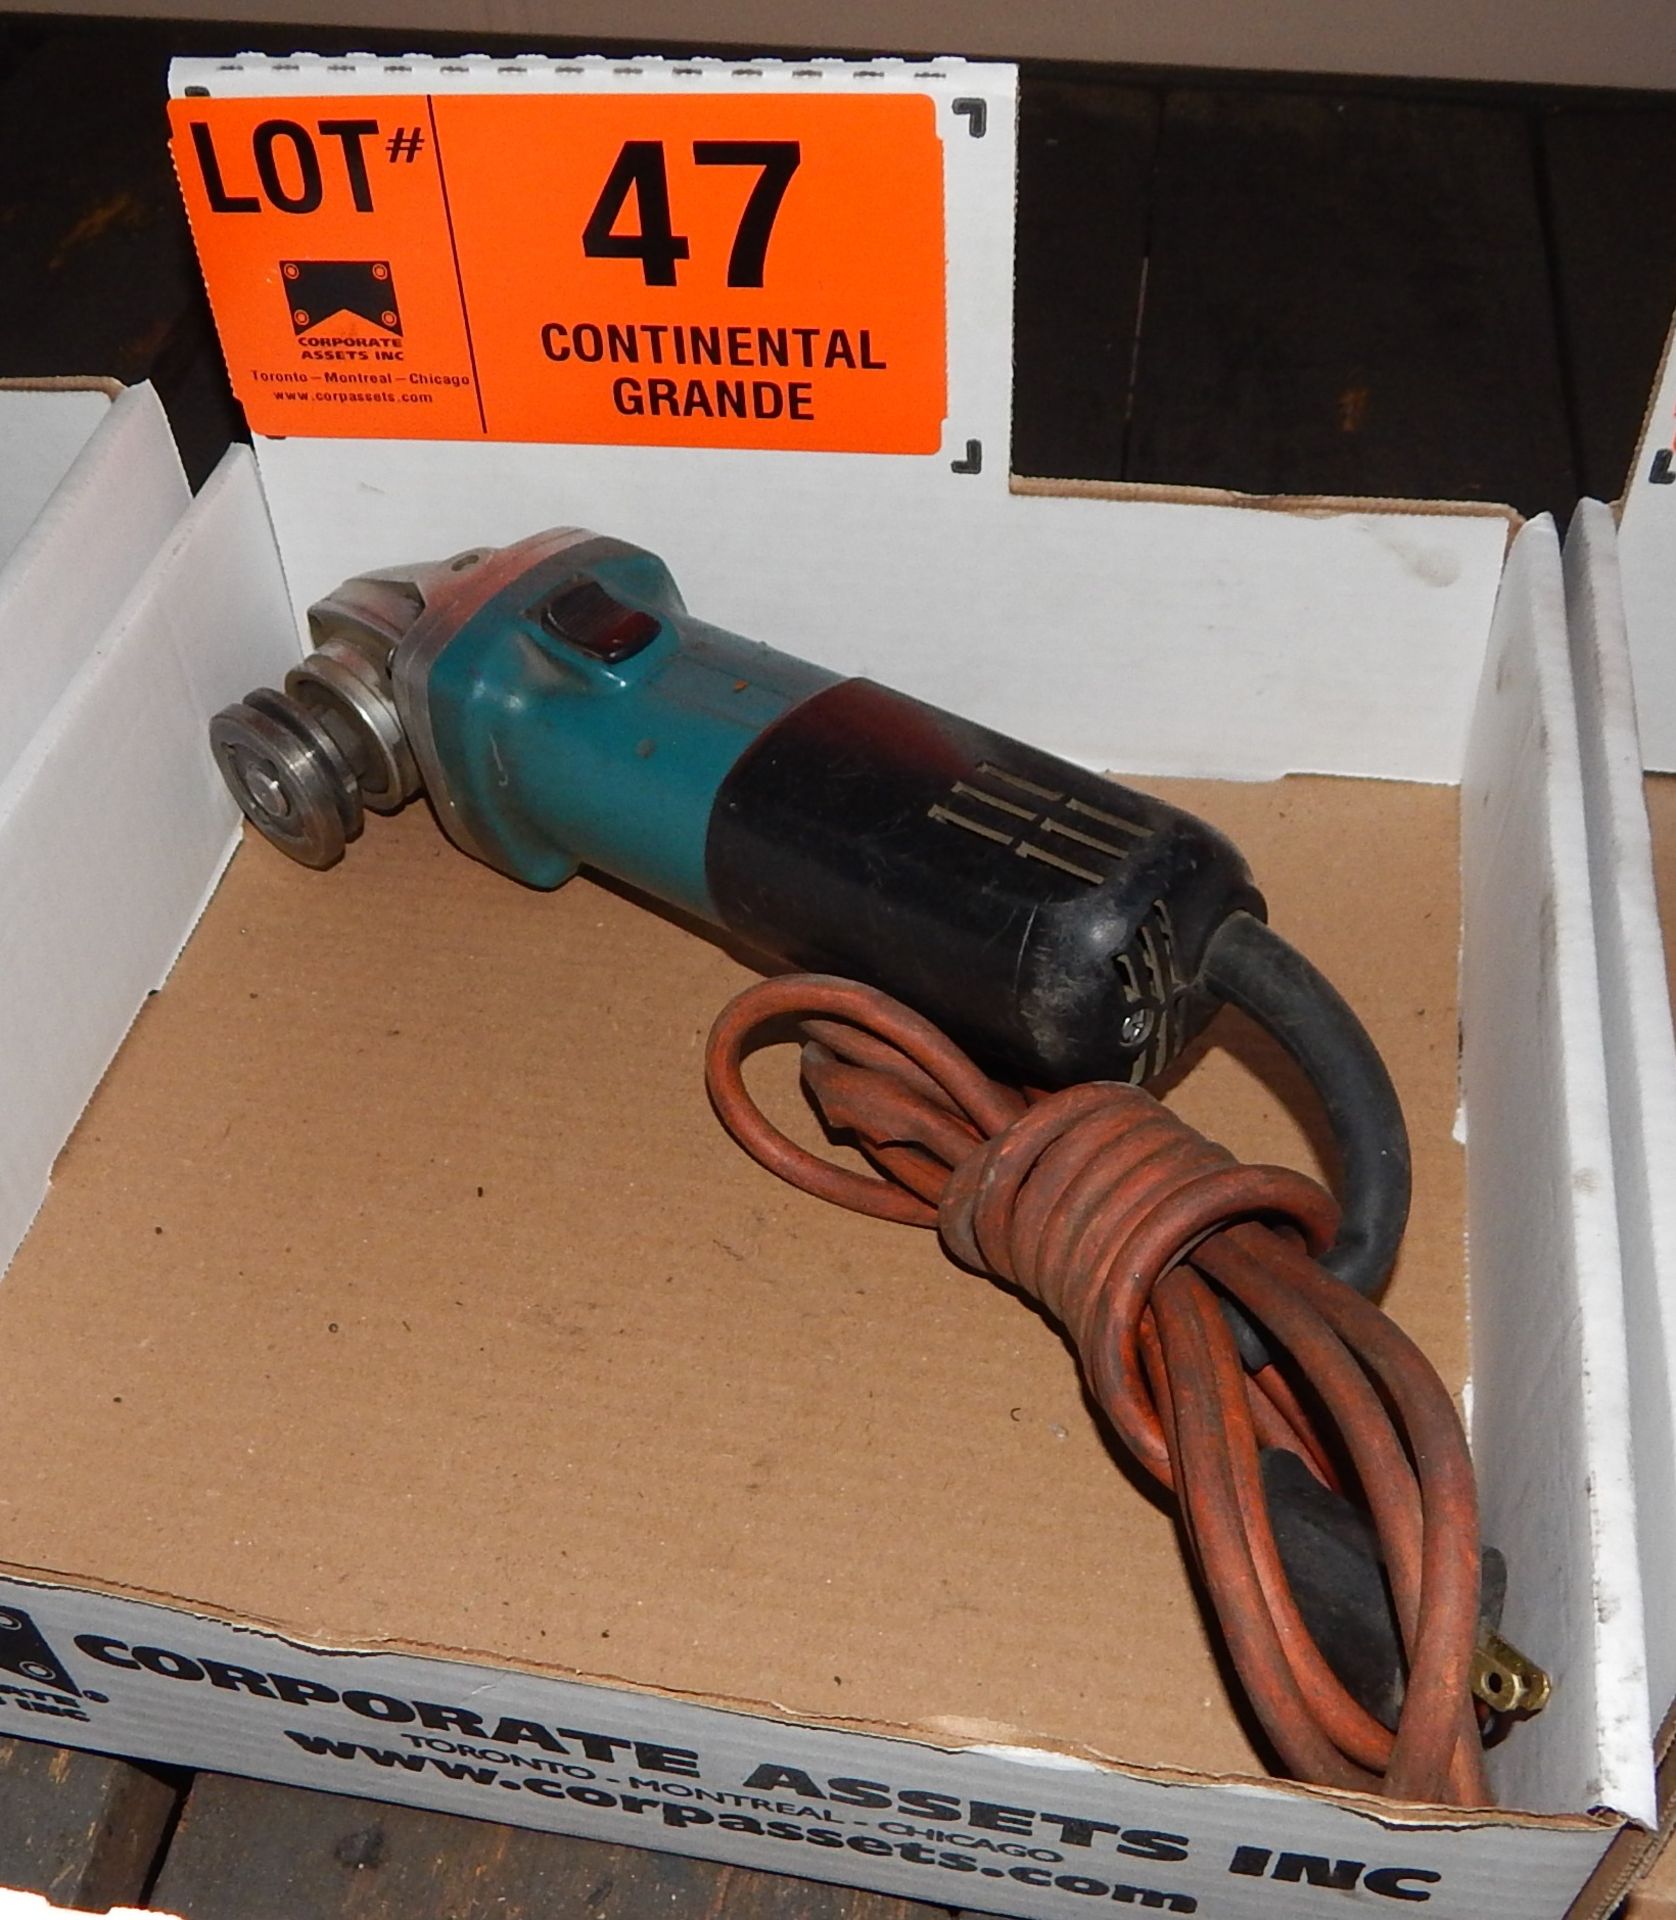 ELECTRIC ANGLE GRINDER